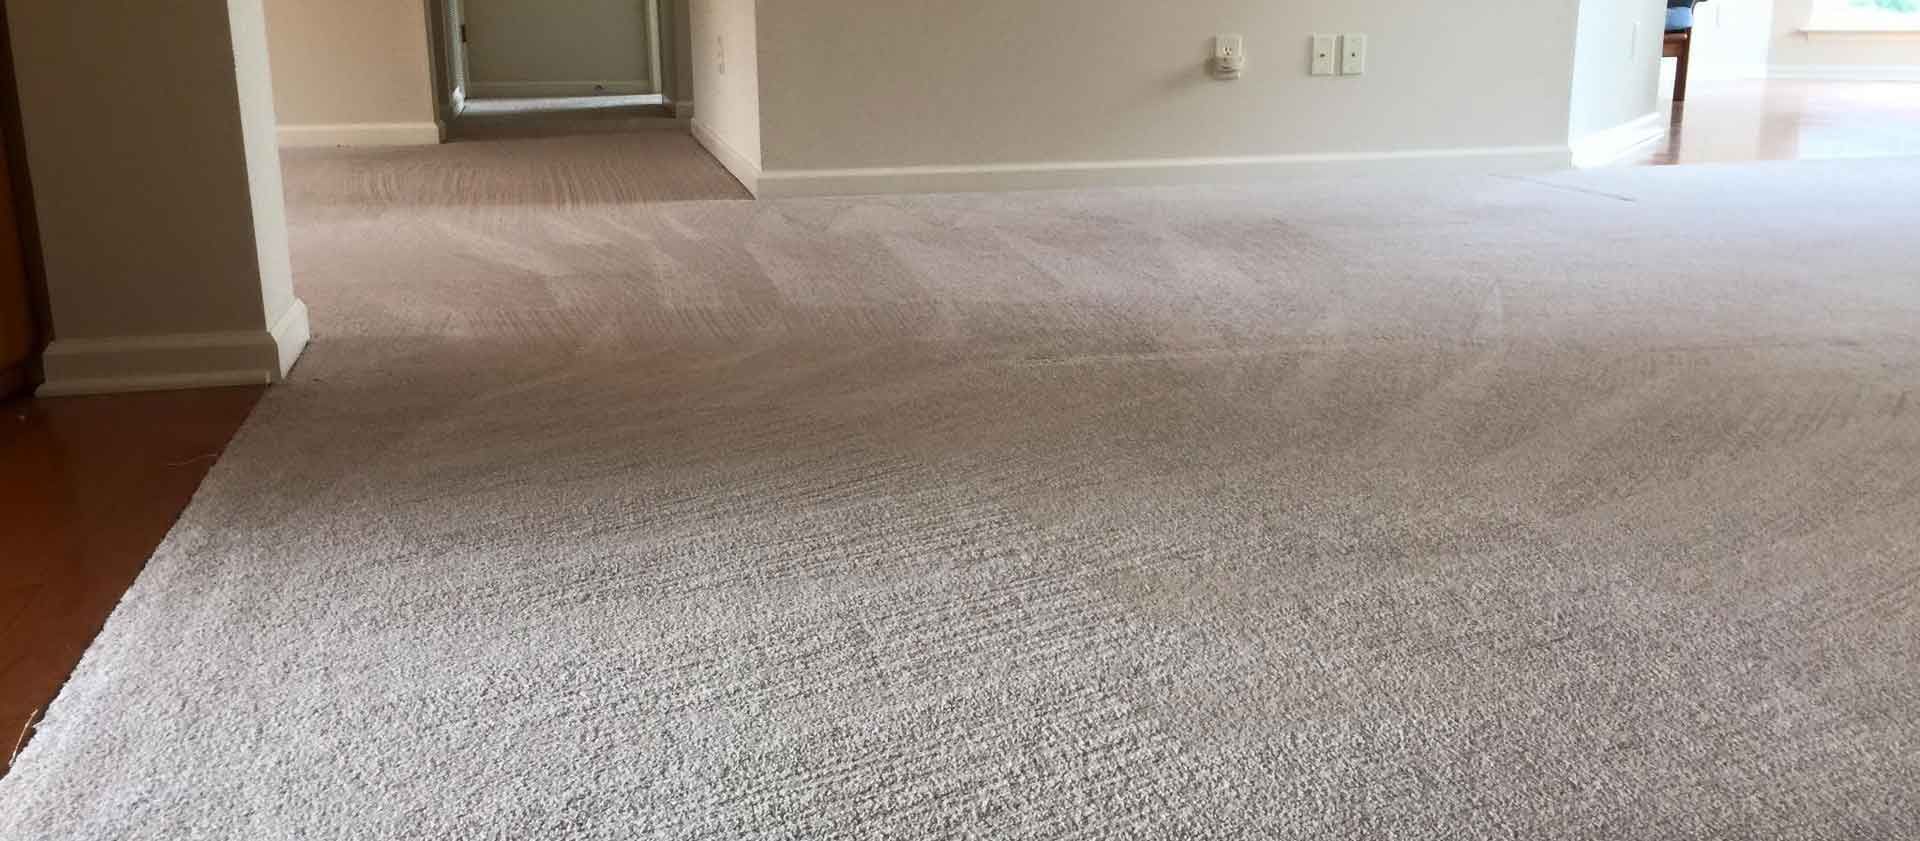 Commercial Carpet Cleaning in Farragut, TN